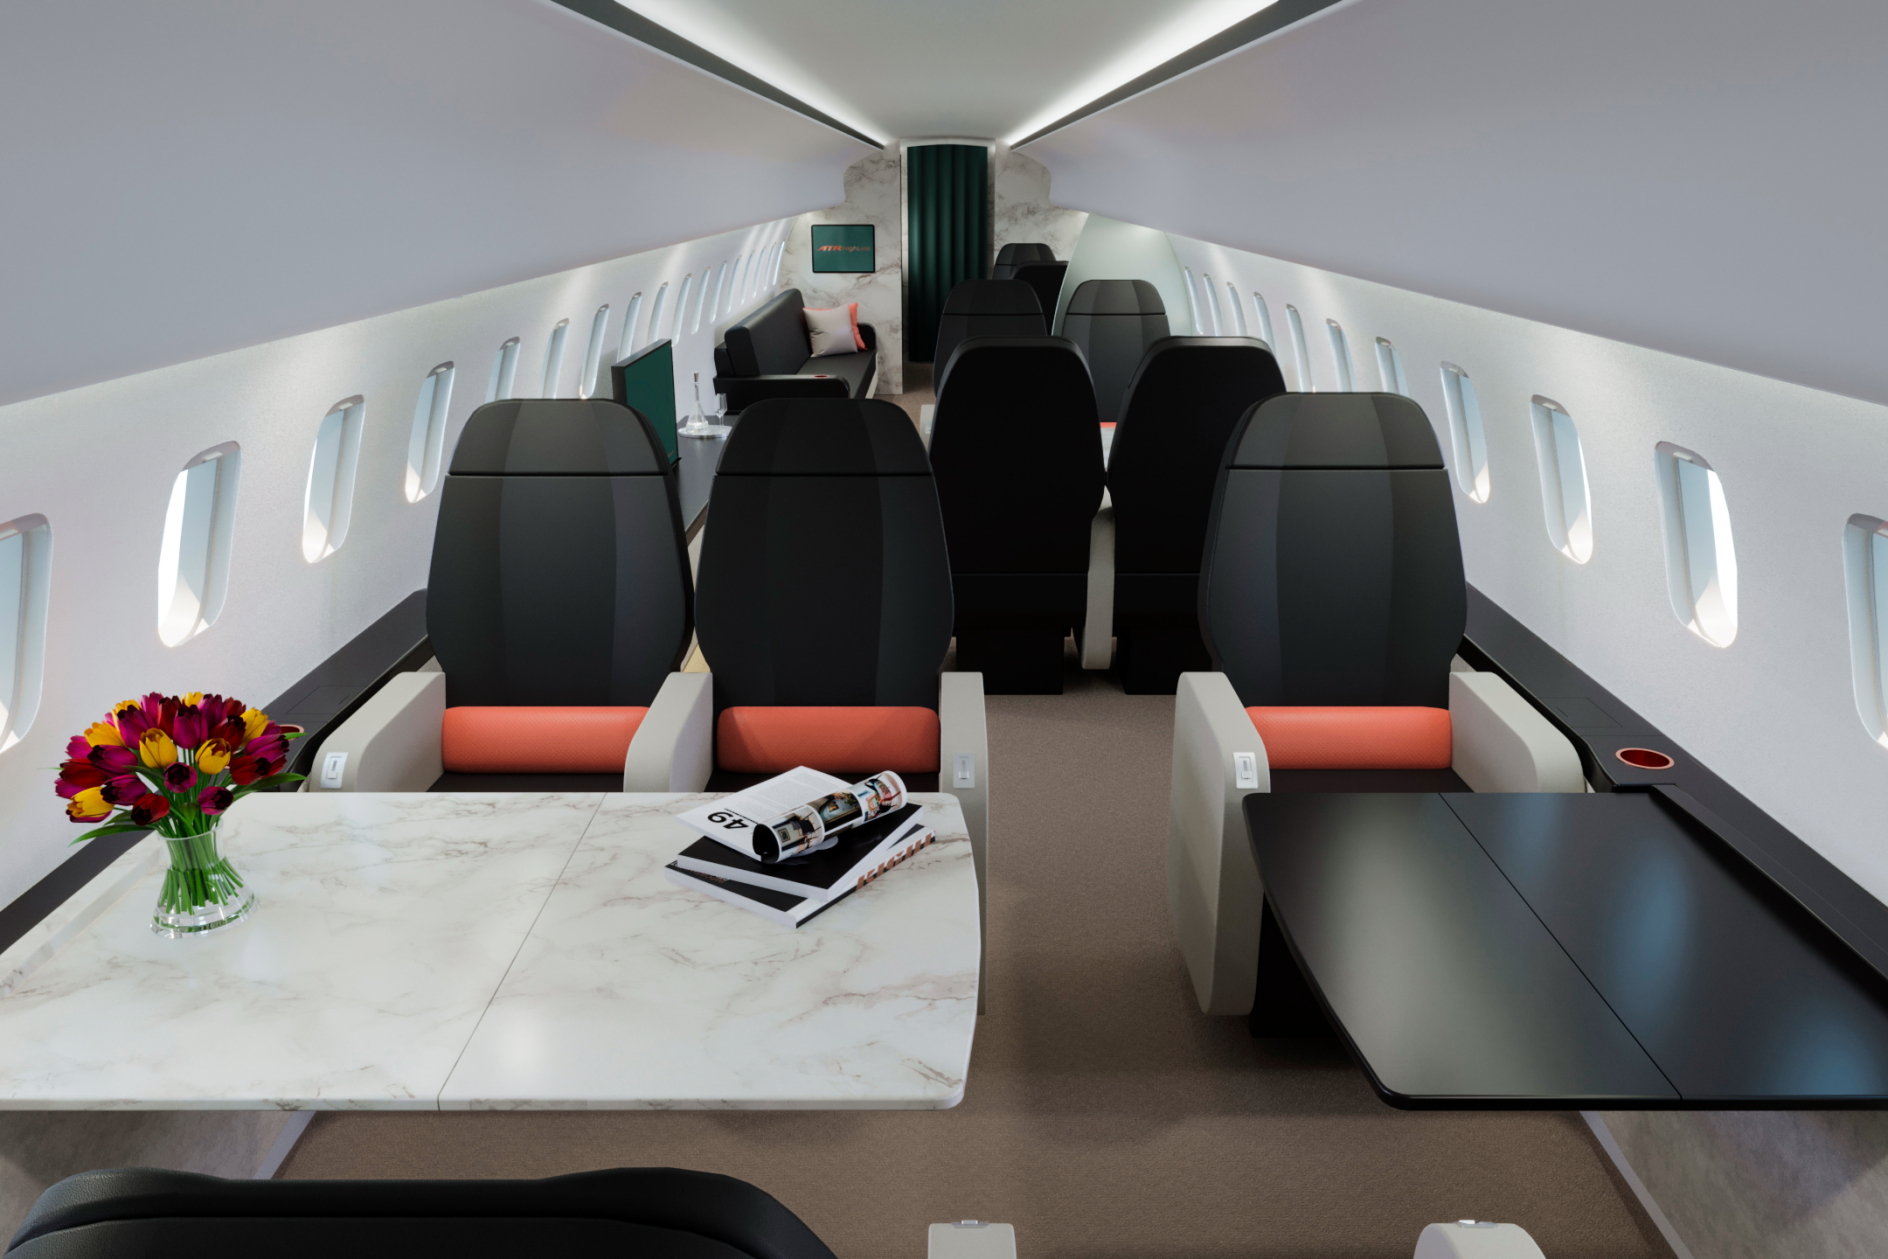 Bespoke luxury onboard an ATR aircraft. Click to enlarge.